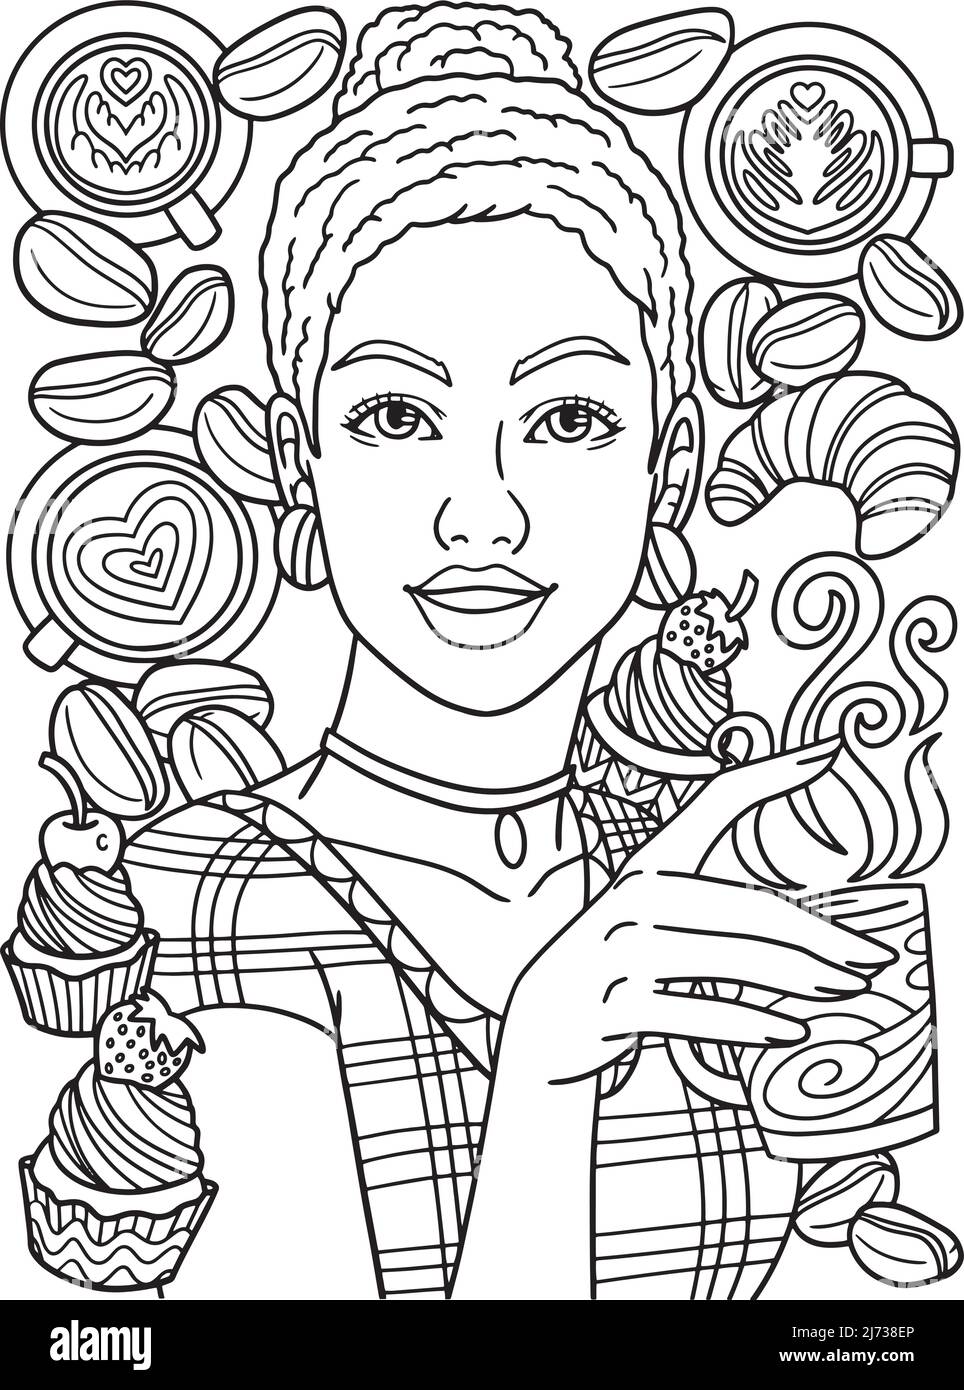 Afro American Woman Drinking Coffee Adult Coloring Stock Vector